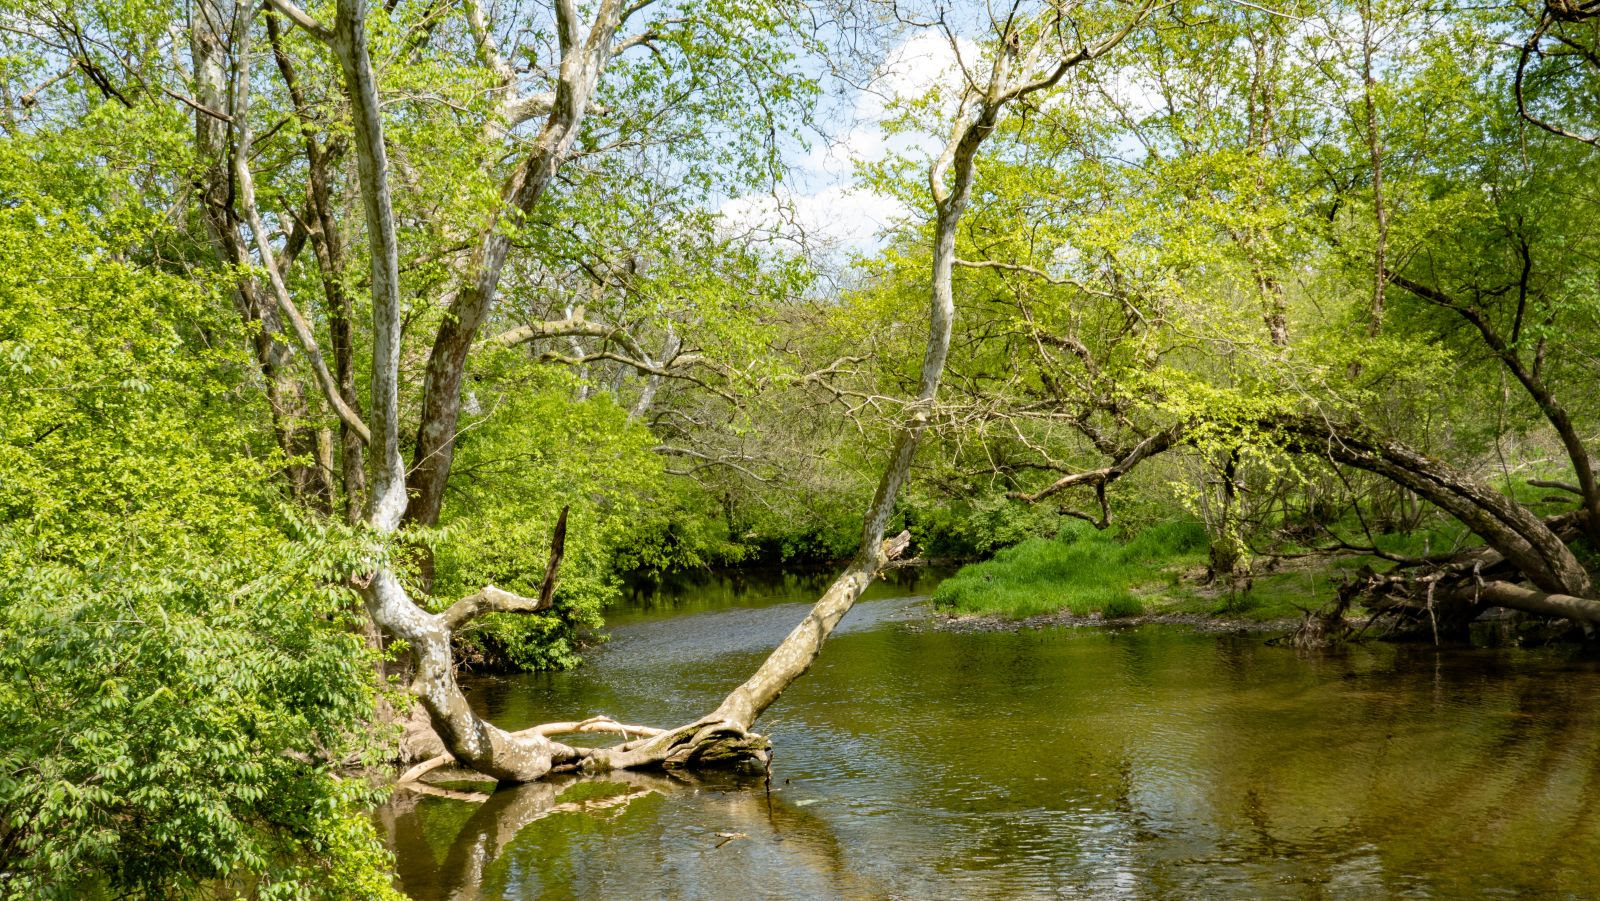 Sycamore growing on the Wissahickon. Paul Meyer.